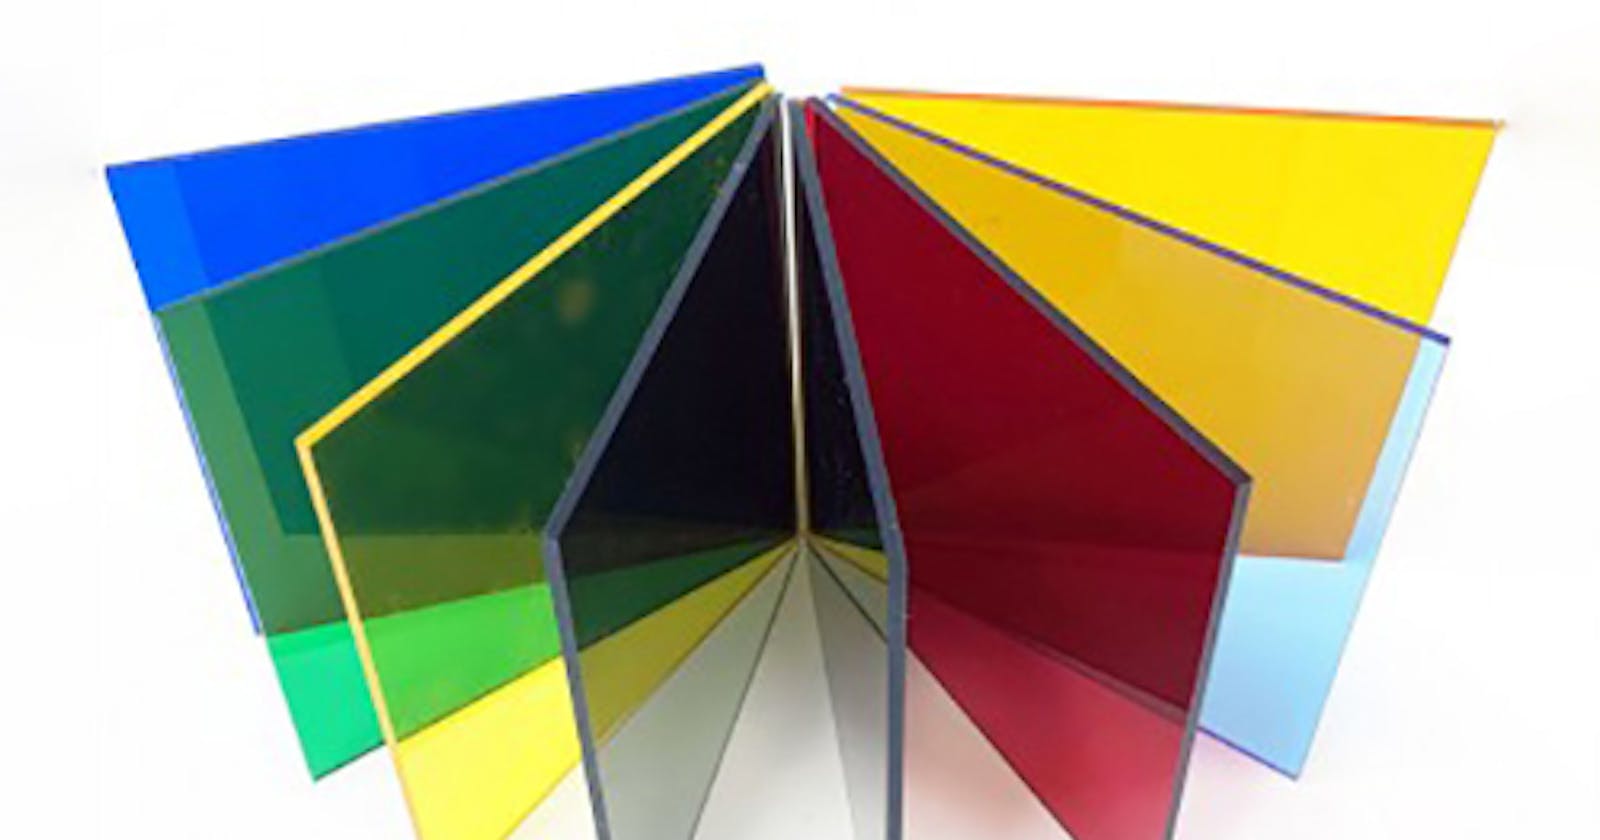 Cast Acrylic Sheets Market Trends, Demand, Growth, Value & Analysis Report by Zion Market Research